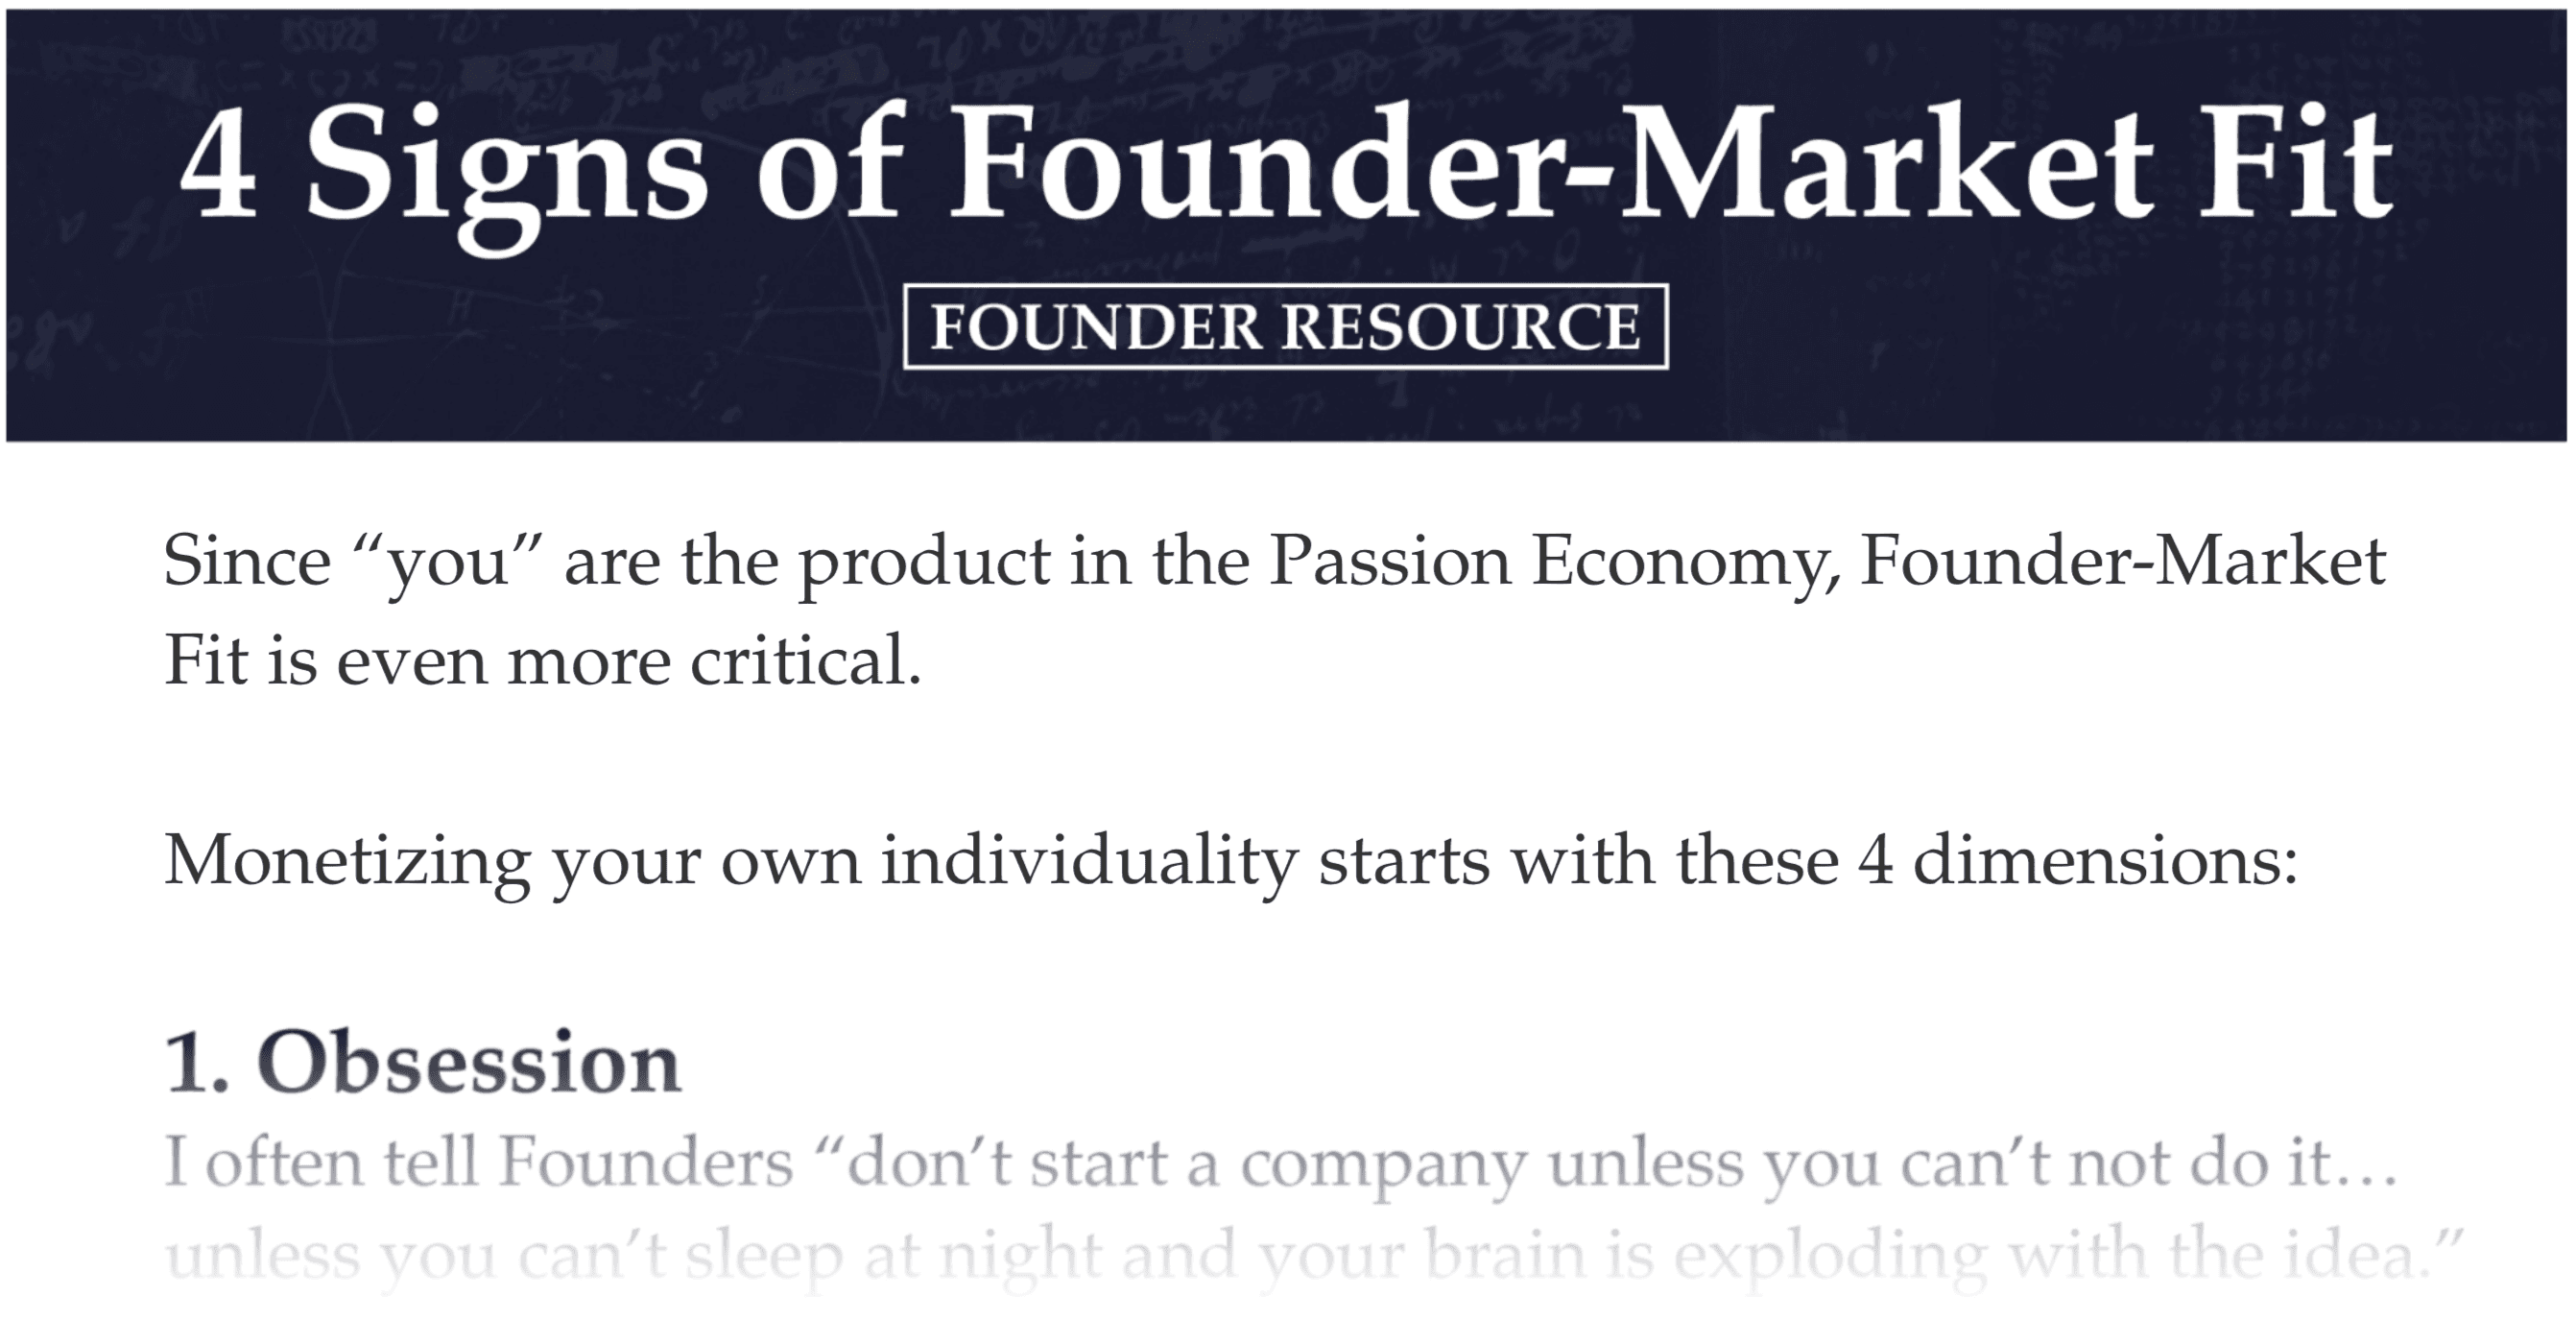 Founder-Market Fit for Passion Economy